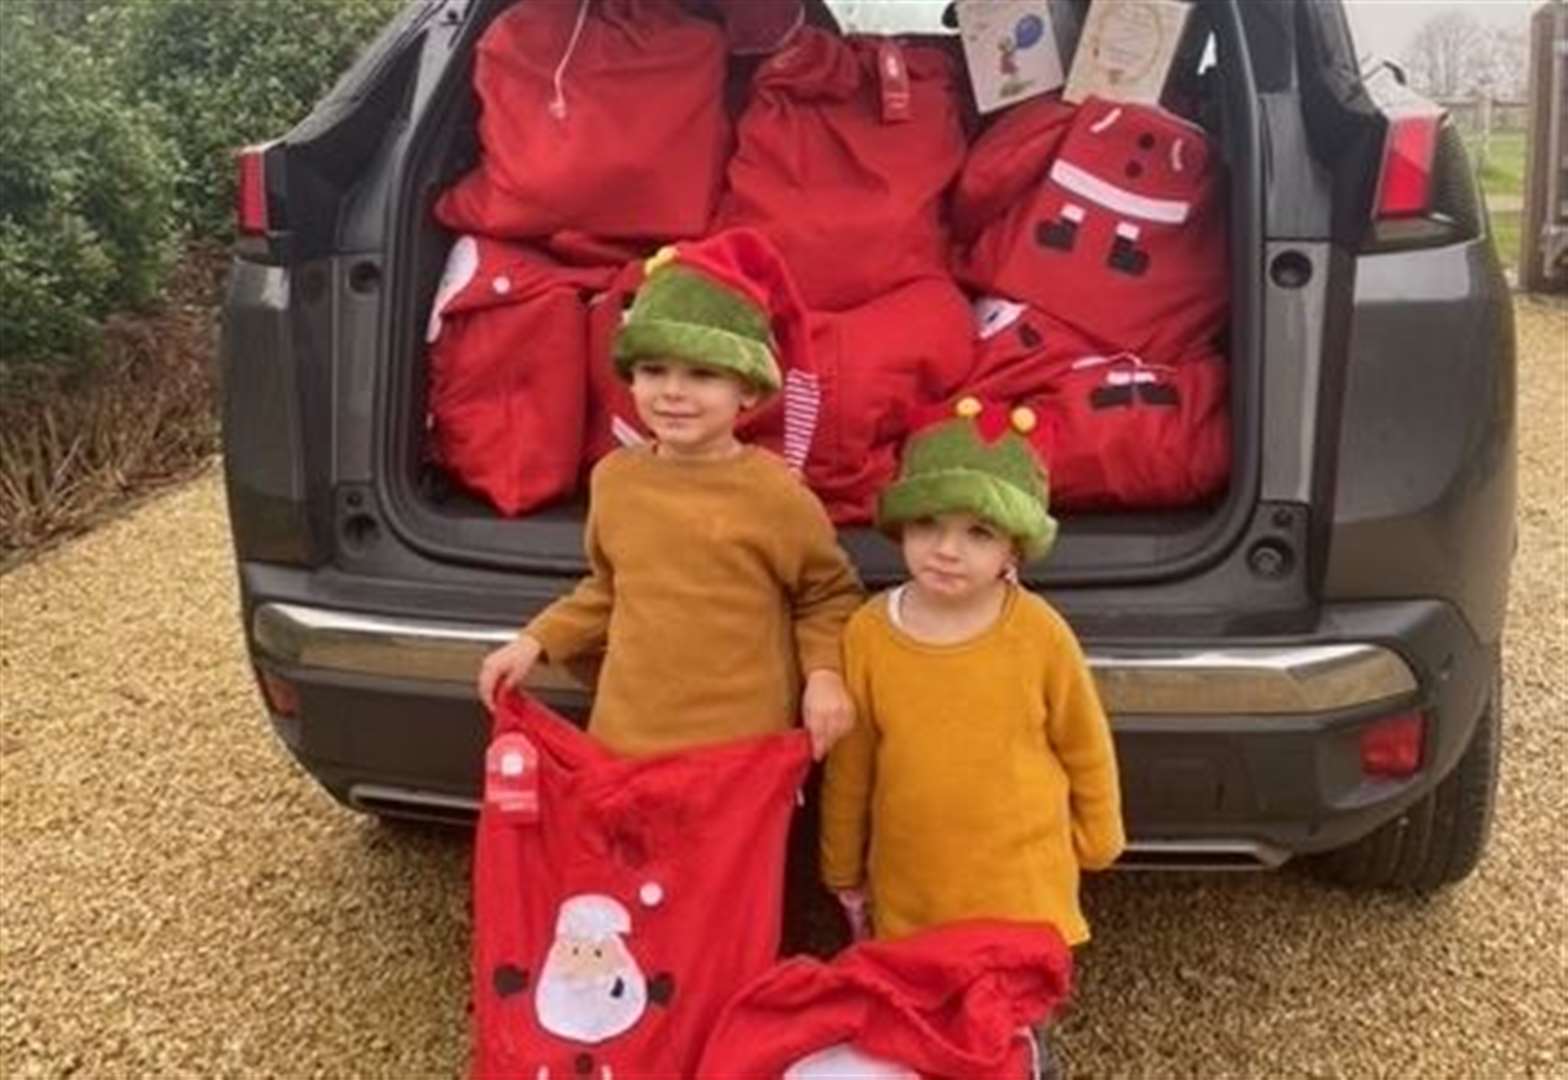 Army of 'elves' ensures children don't go without on big day 